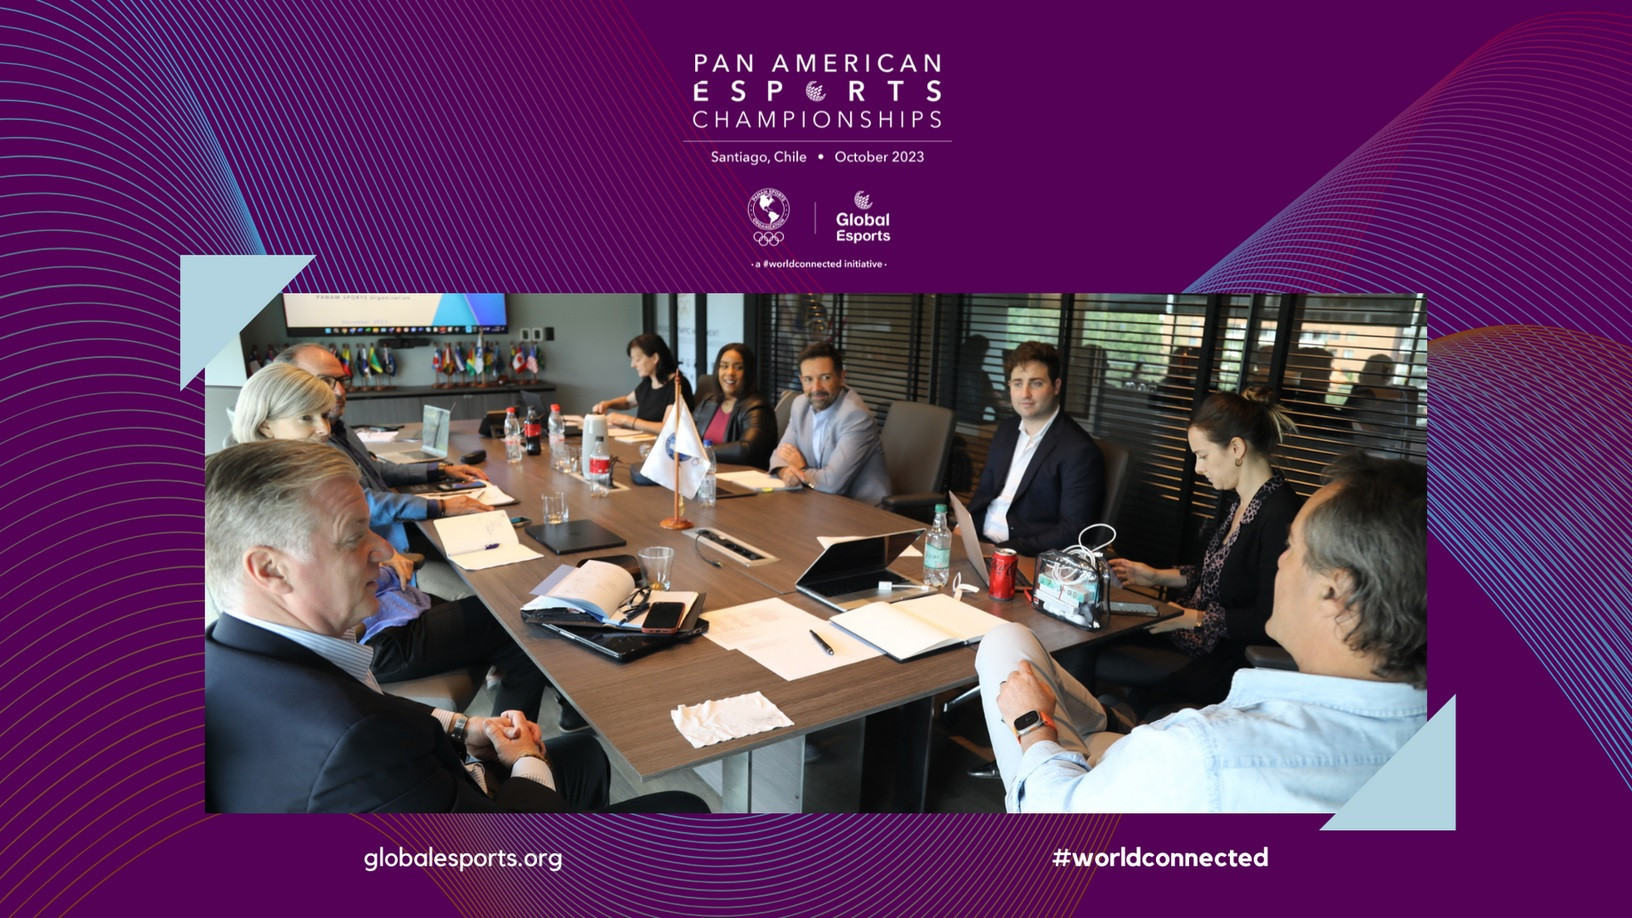 GEF officials visited Santiago to discuss plans for the Pan American Esports Championships ©GEF